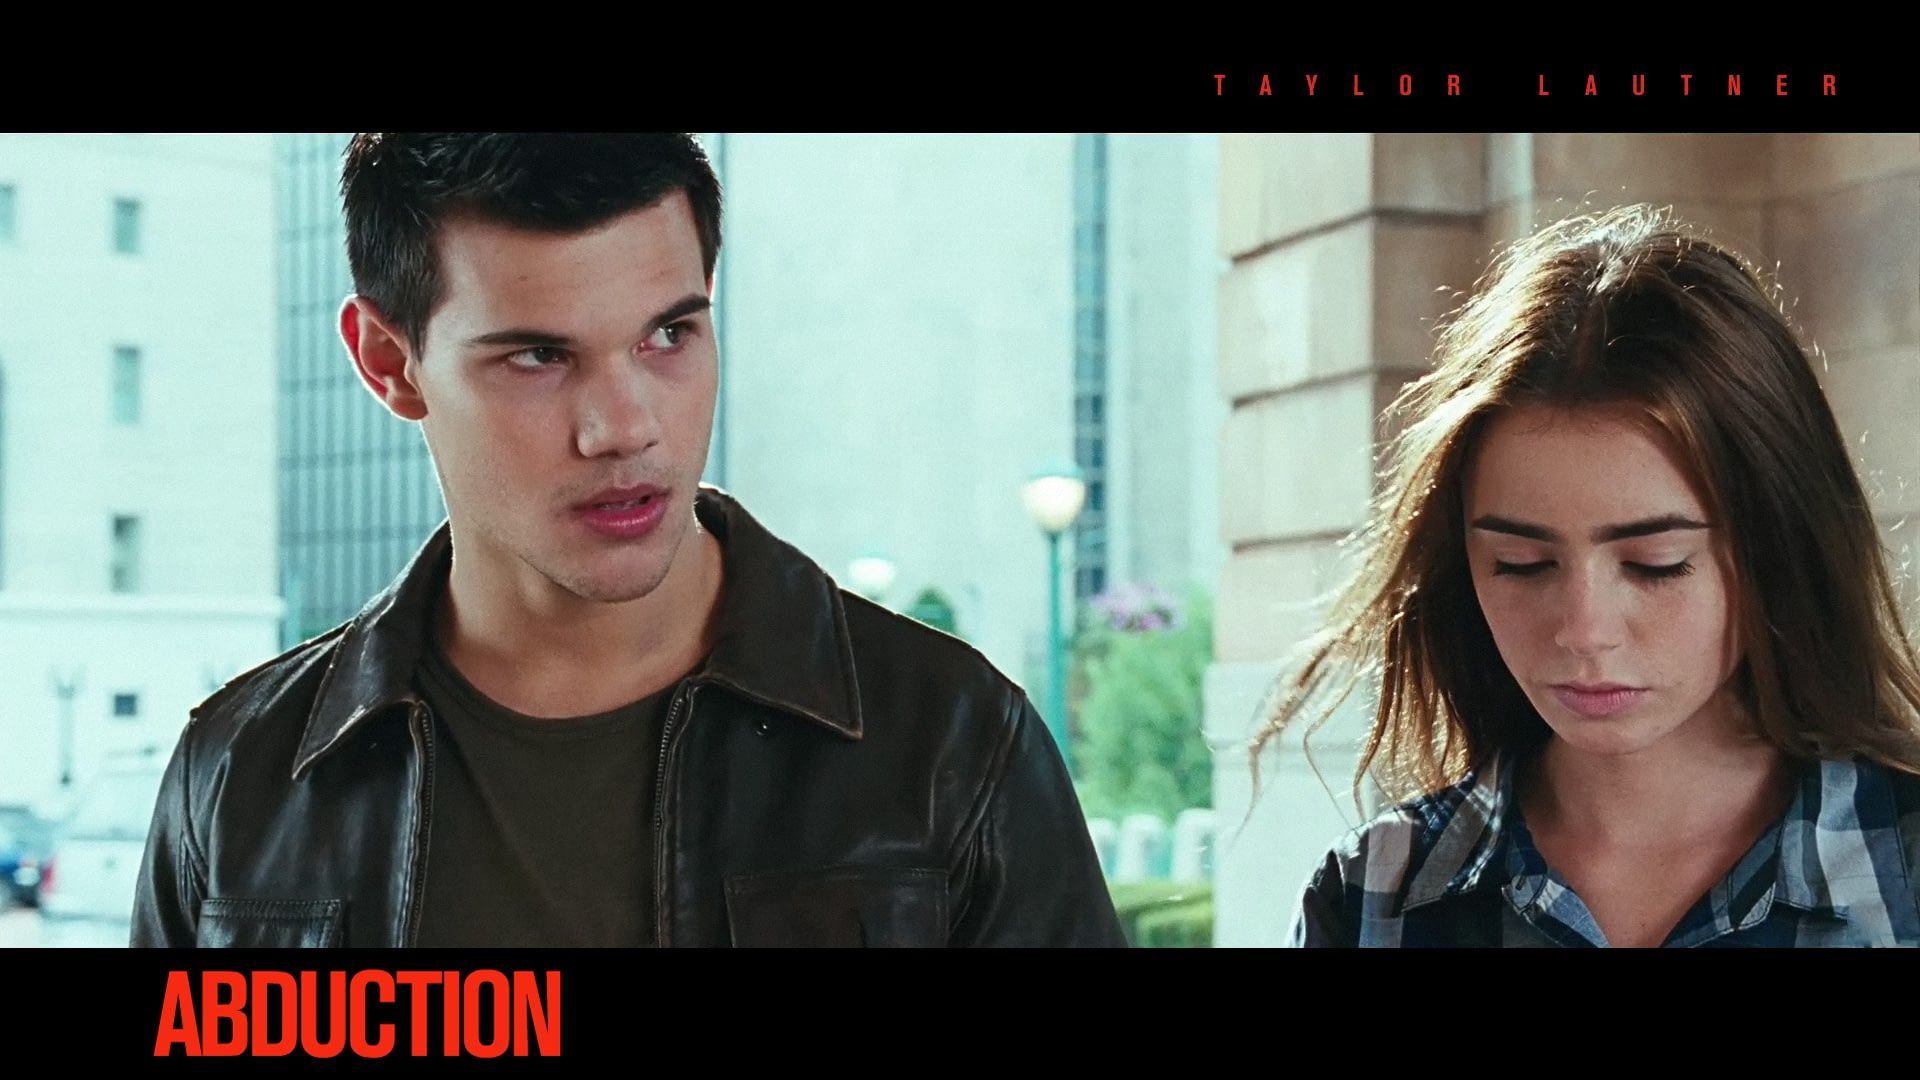 Exclusive HD wallpaper of Abduction with Taylor Lautner